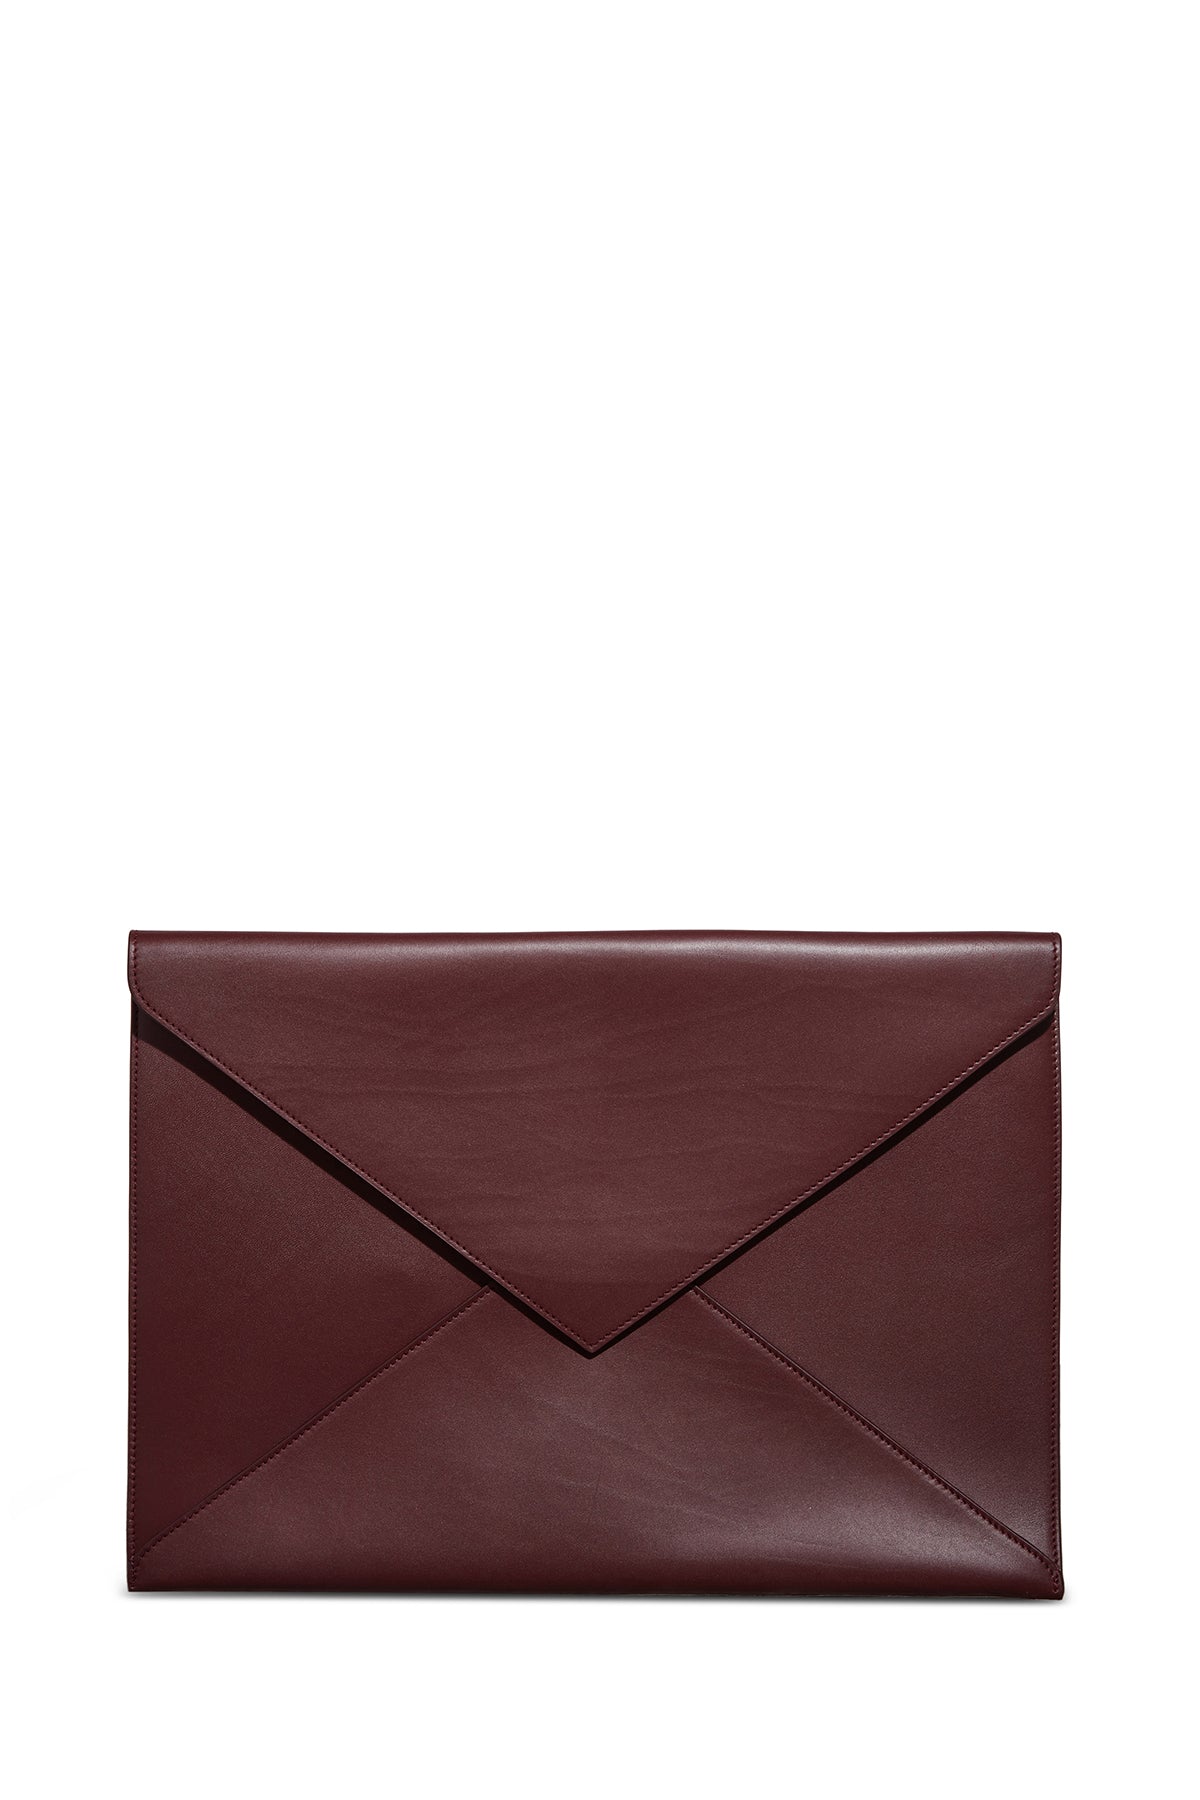 Large Envelope in Bordeaux Nappa Leather